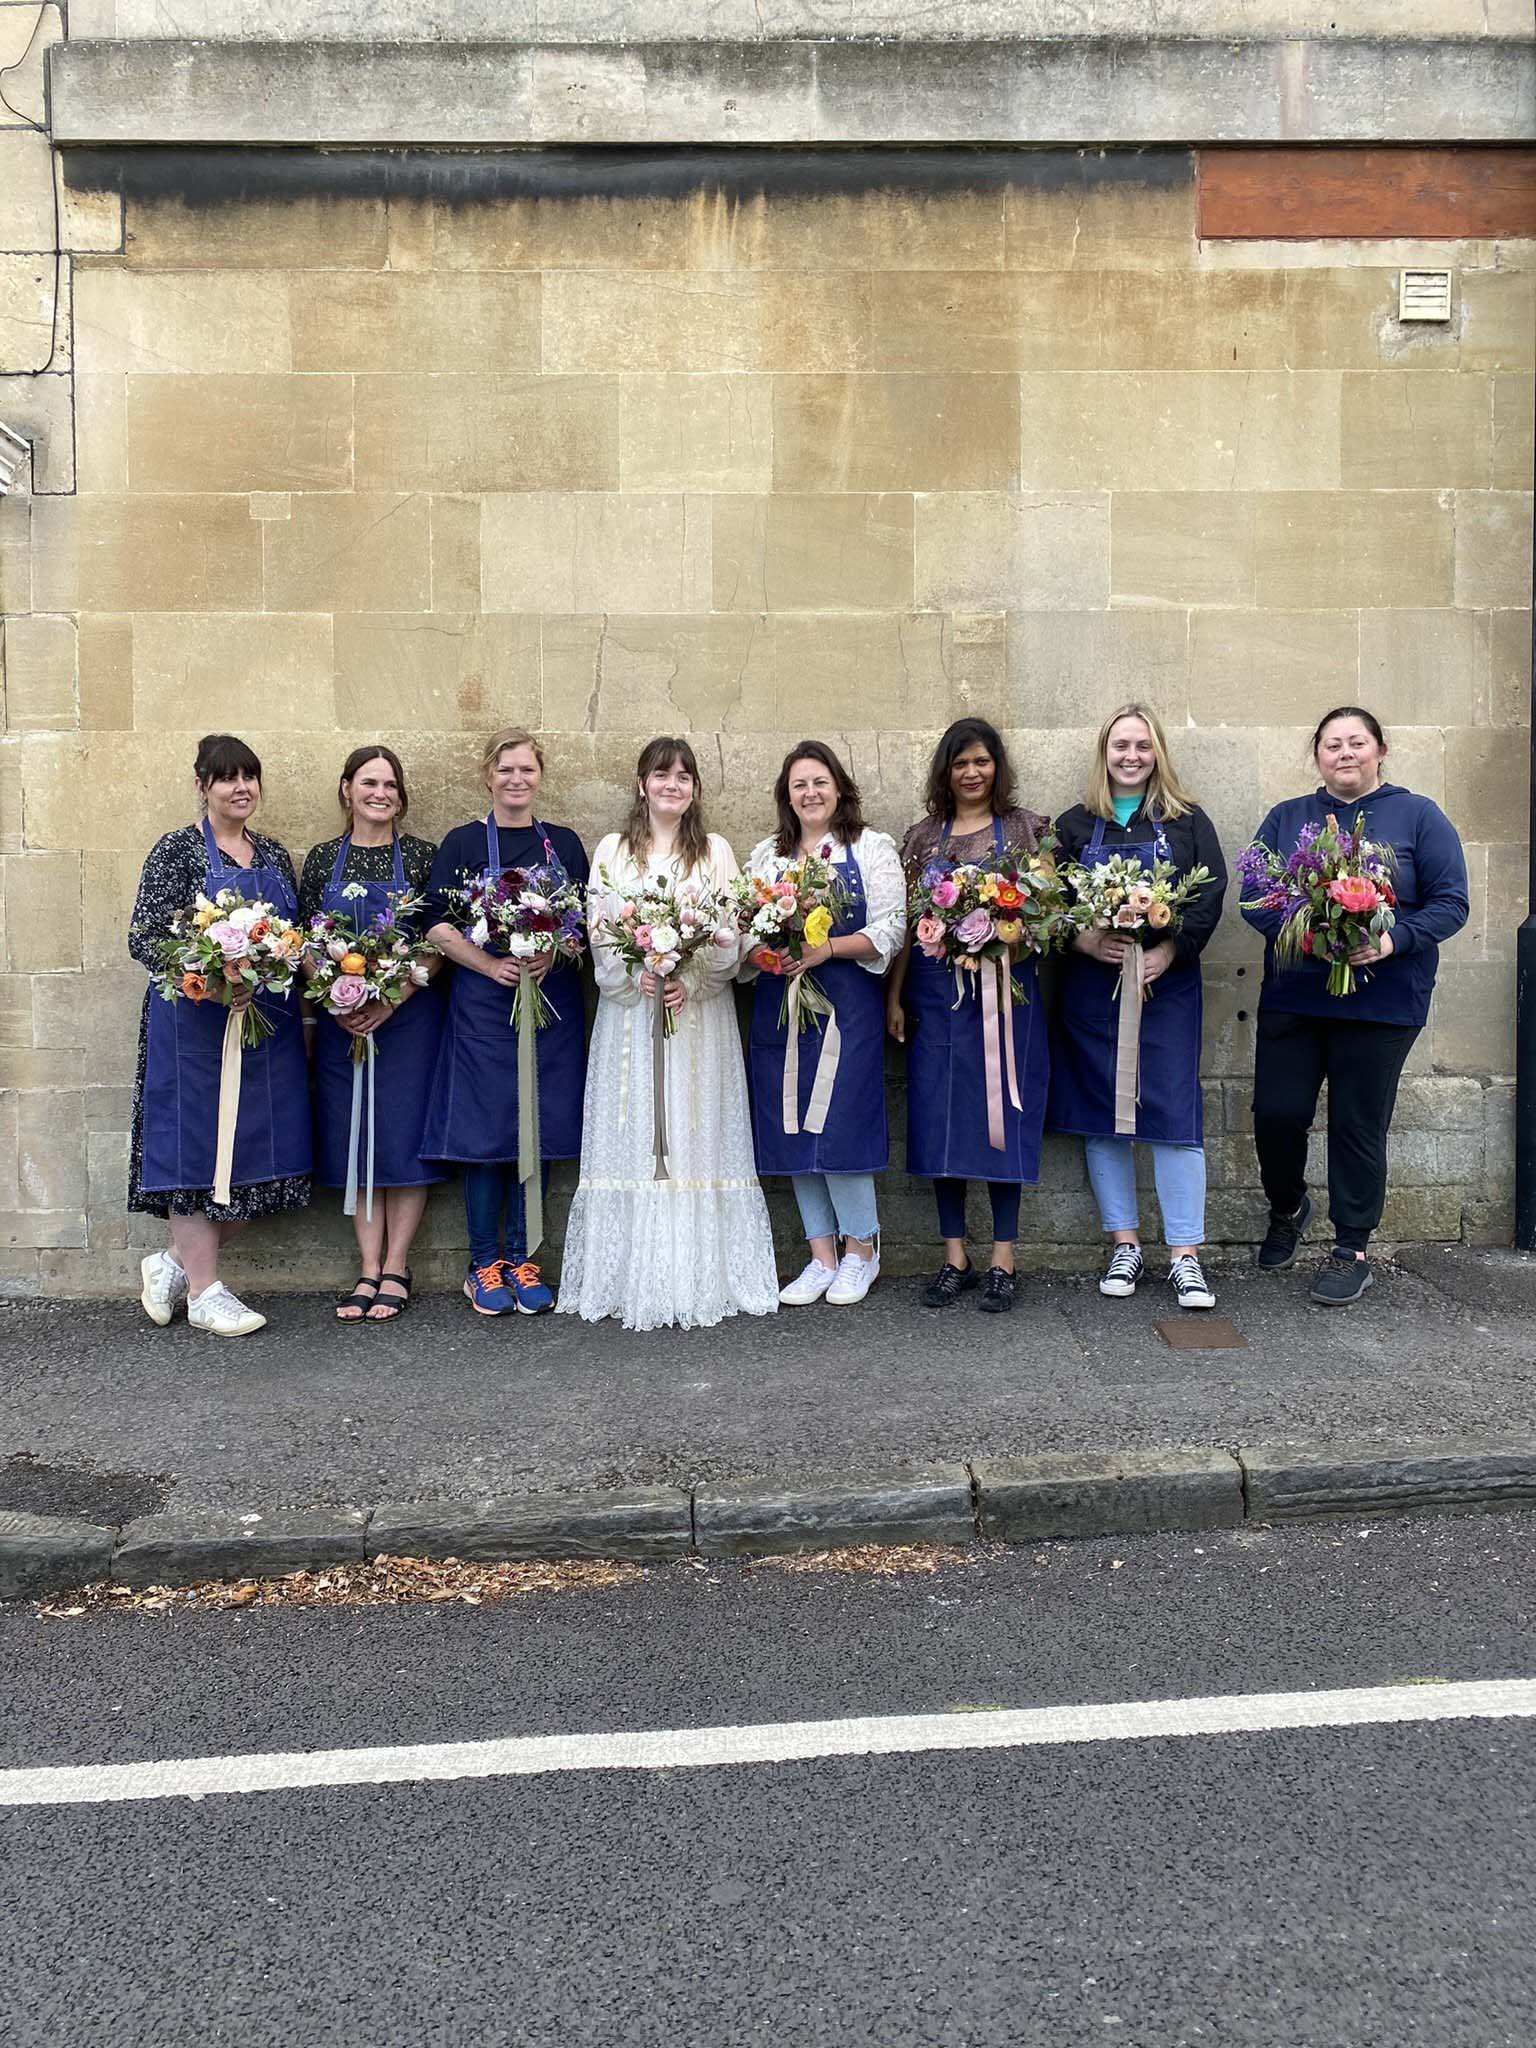 Group of floristry students at The Bath Flower School Bridal Bouquets Workshop